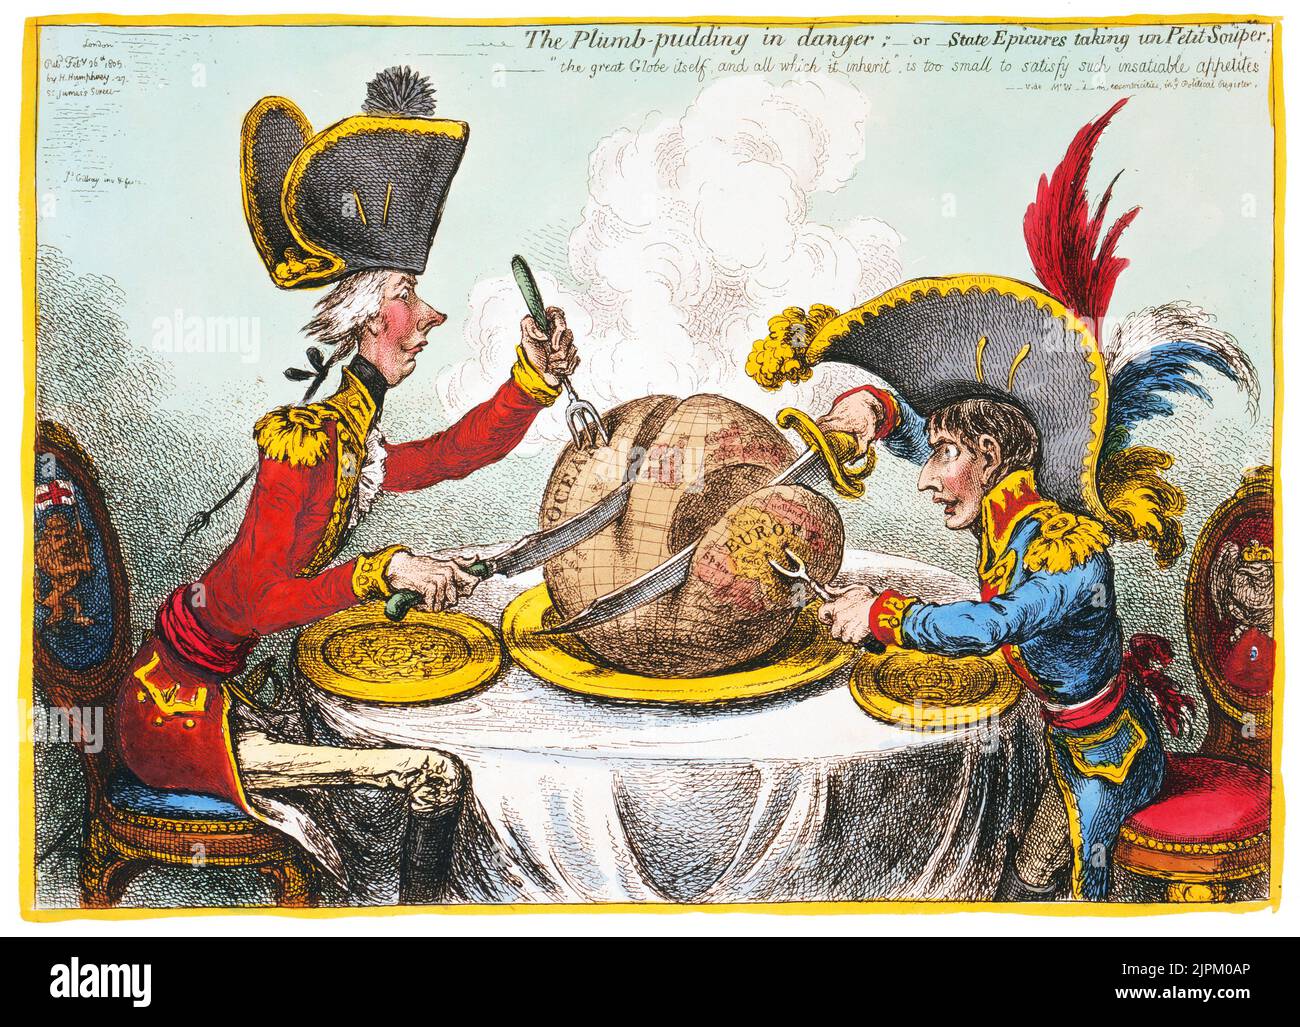 The Plumb-pudding in danger, or, State epicures taking un petit souper. Gillray, James, engraver / created by London : H. Humphrey, 1805. William Pitt, wearing a regimental uniform and hat, sitting at a table with Napoleon. They are each carving a large plum pudding on which is a map of the world. Pitt's slice is considerably larger than Napoleon's. Hand-colored etching. Stock Photo